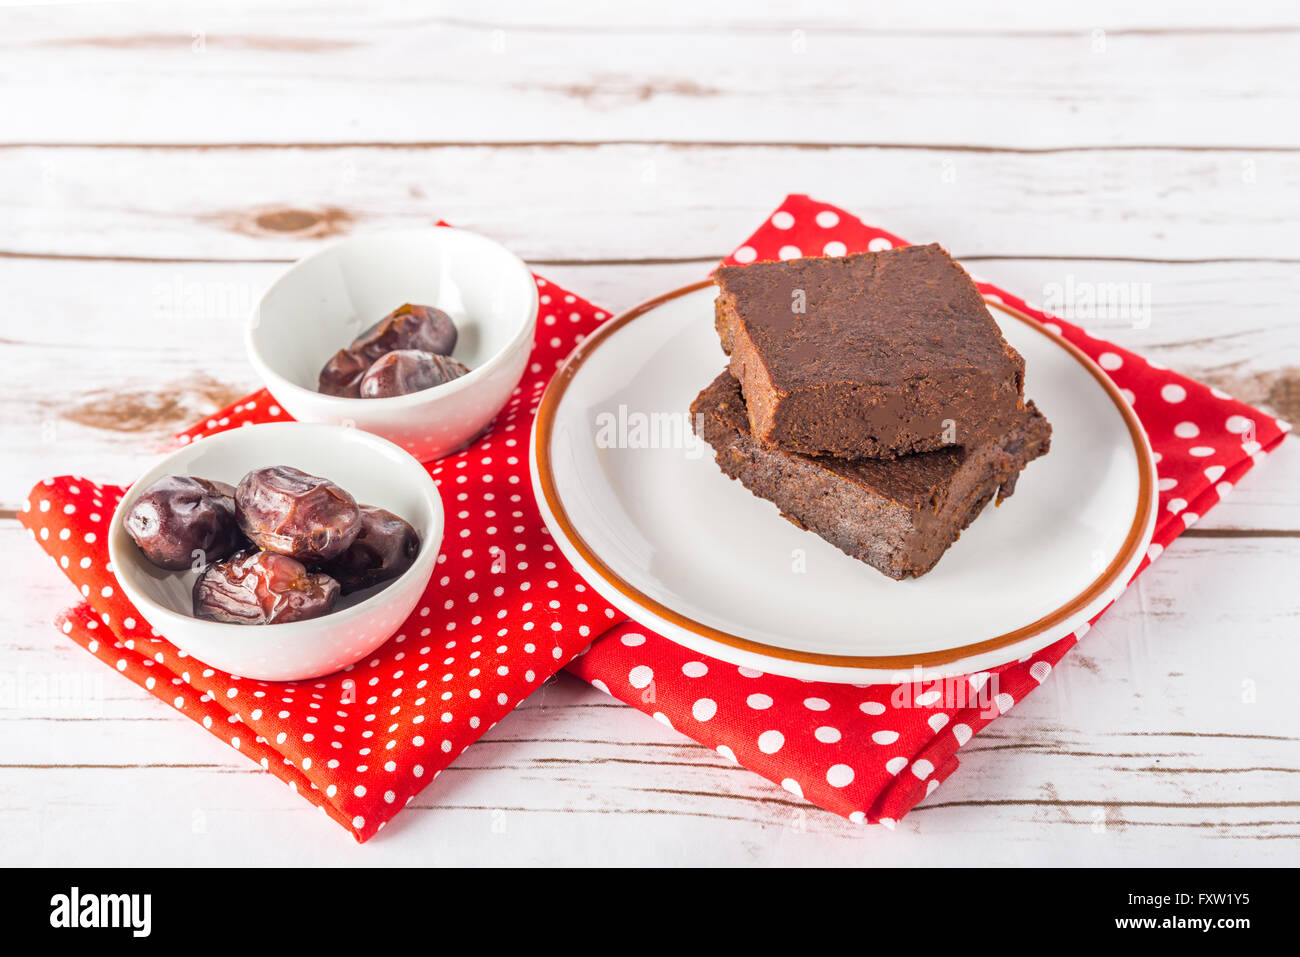 Healthy gluten free Paleo style brownies made with sweet potato, dates and almond flour on a white plate Stock Photo